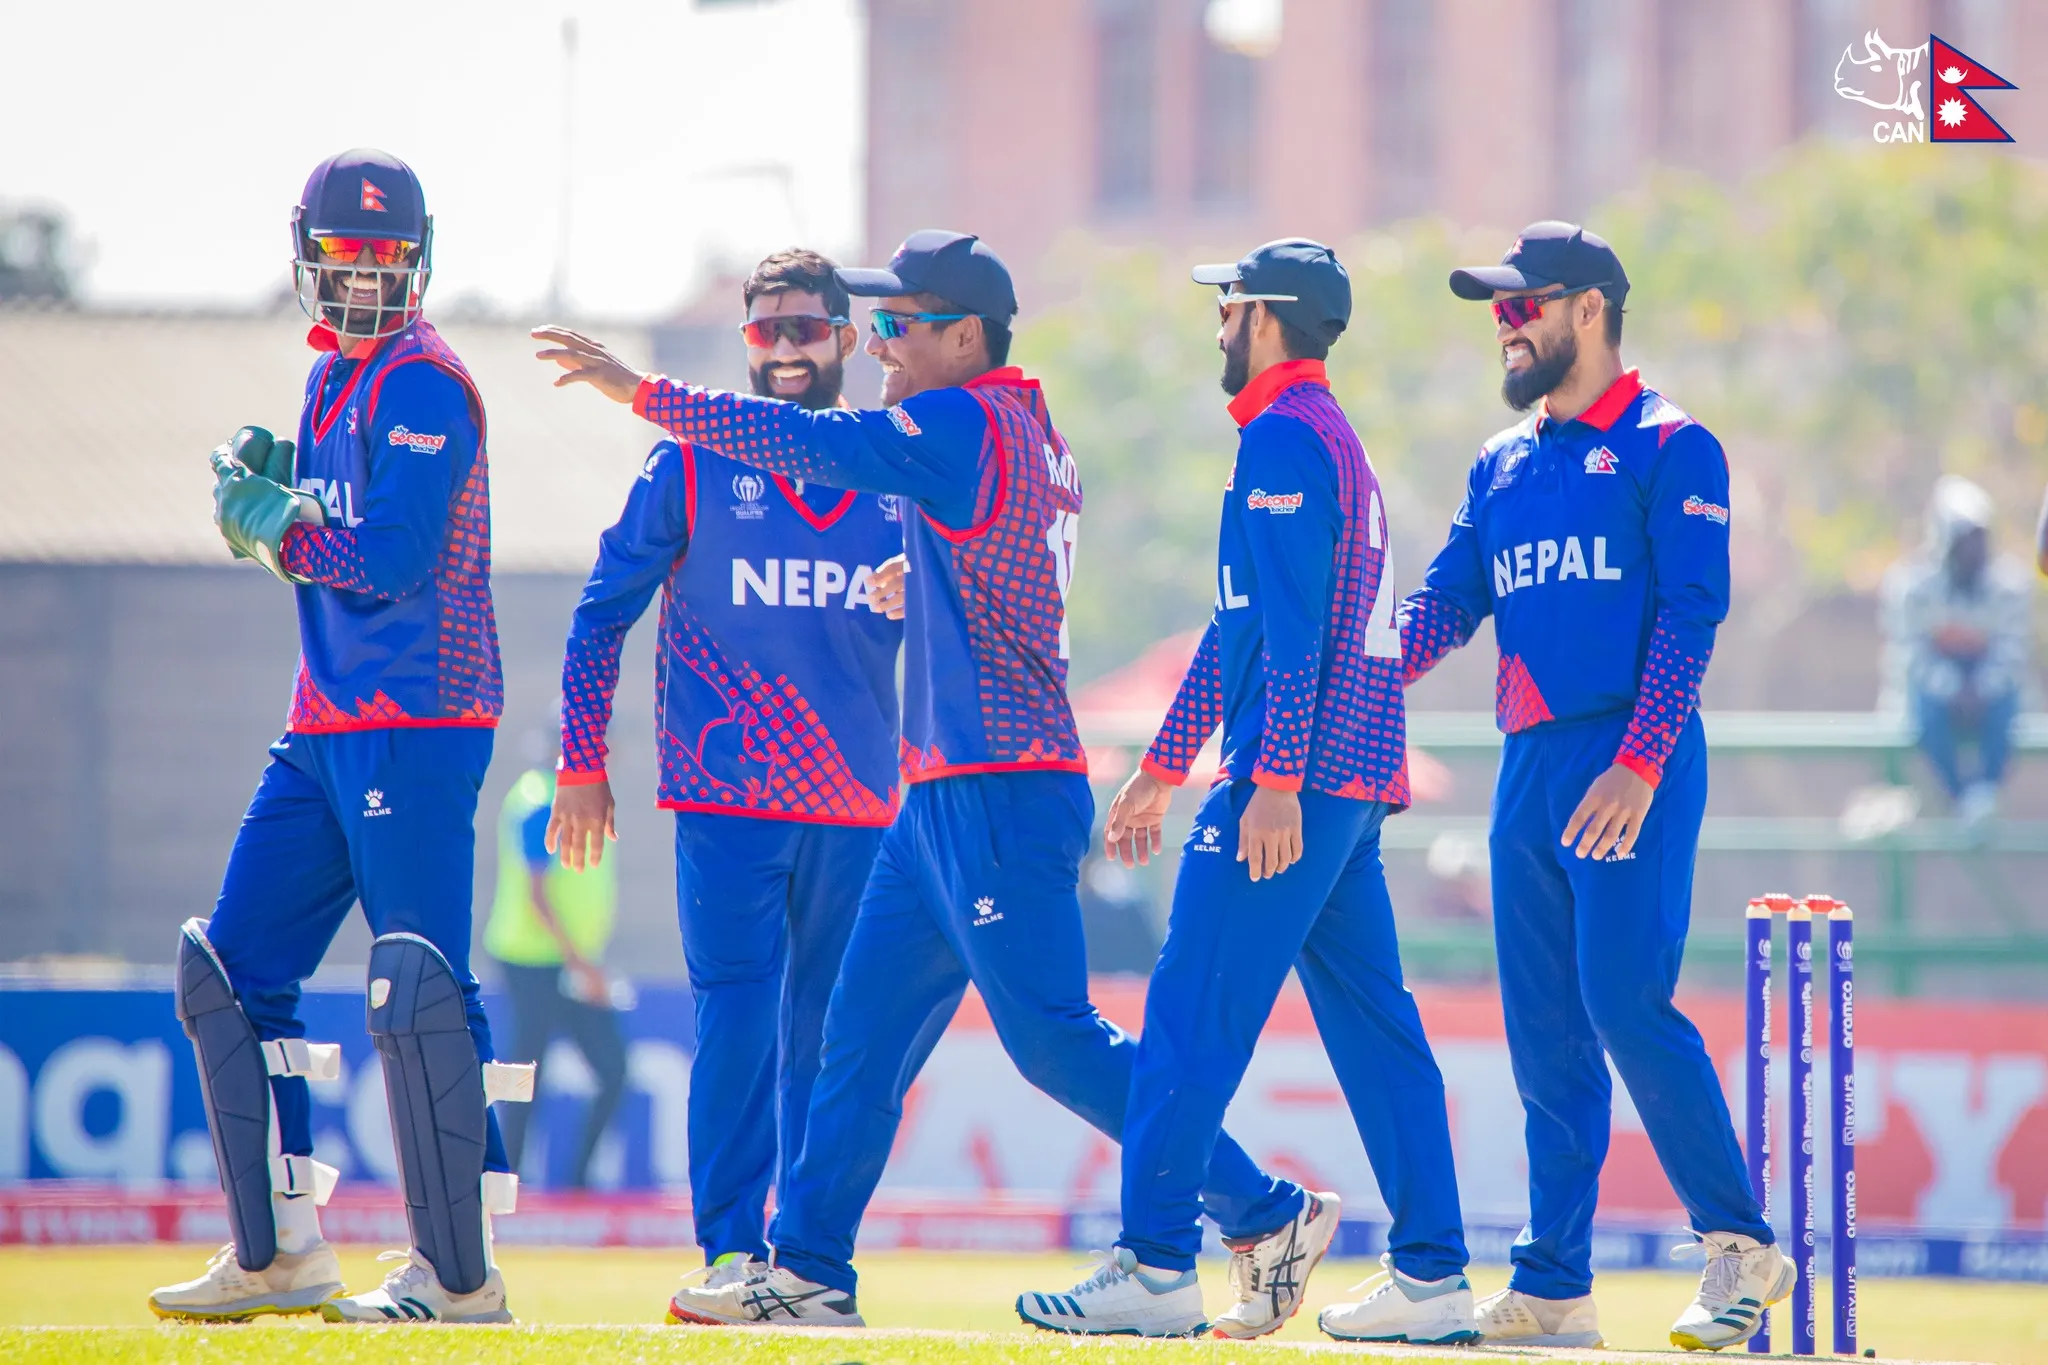 CAN reveals Nepali squad for ICC Men’s CWC League 2 and Nepal-Canada bilateral series